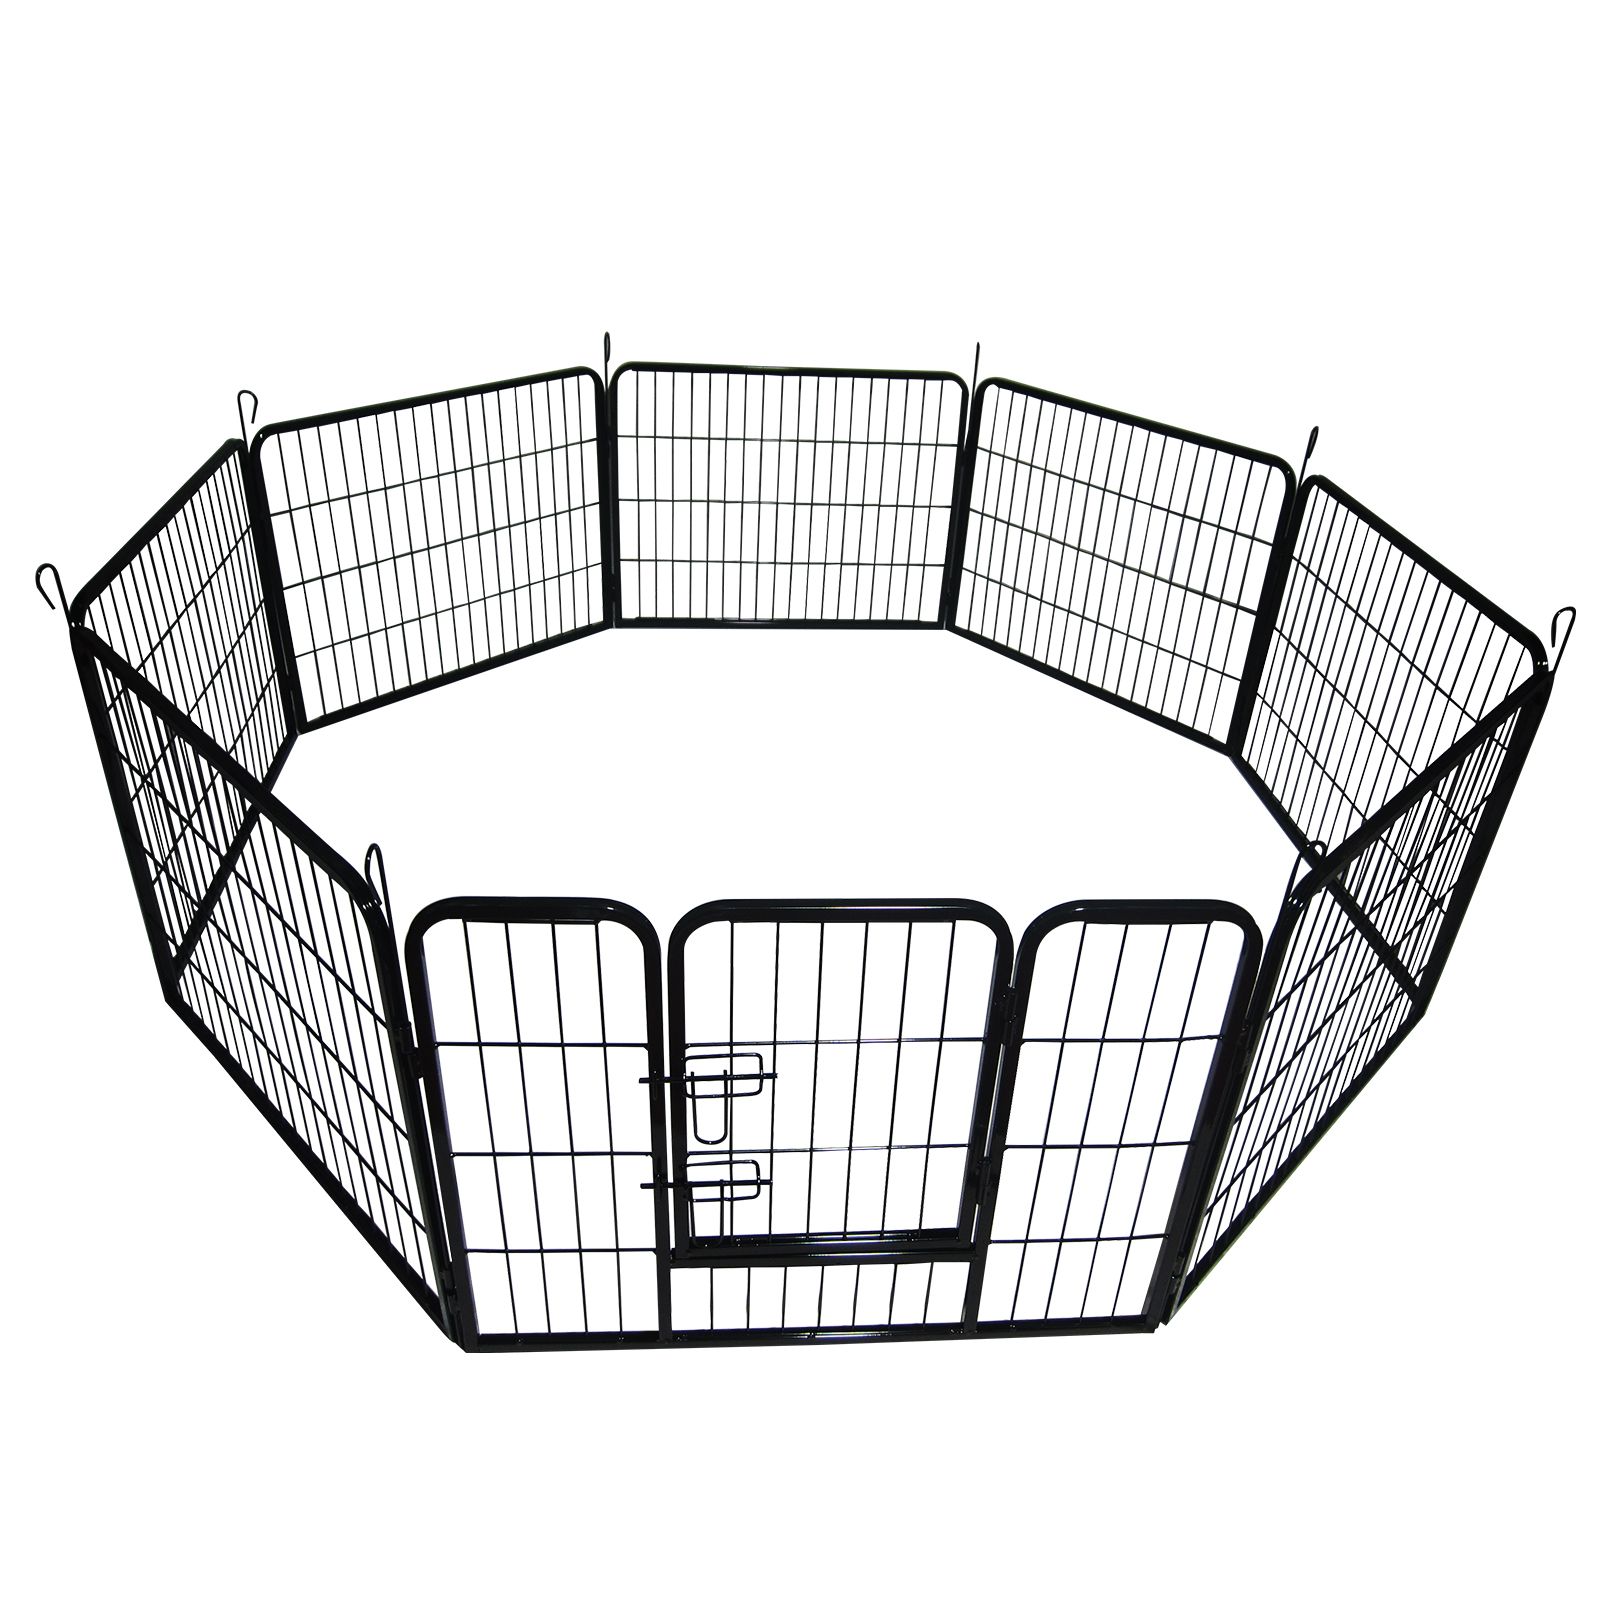 Kennel Drawing